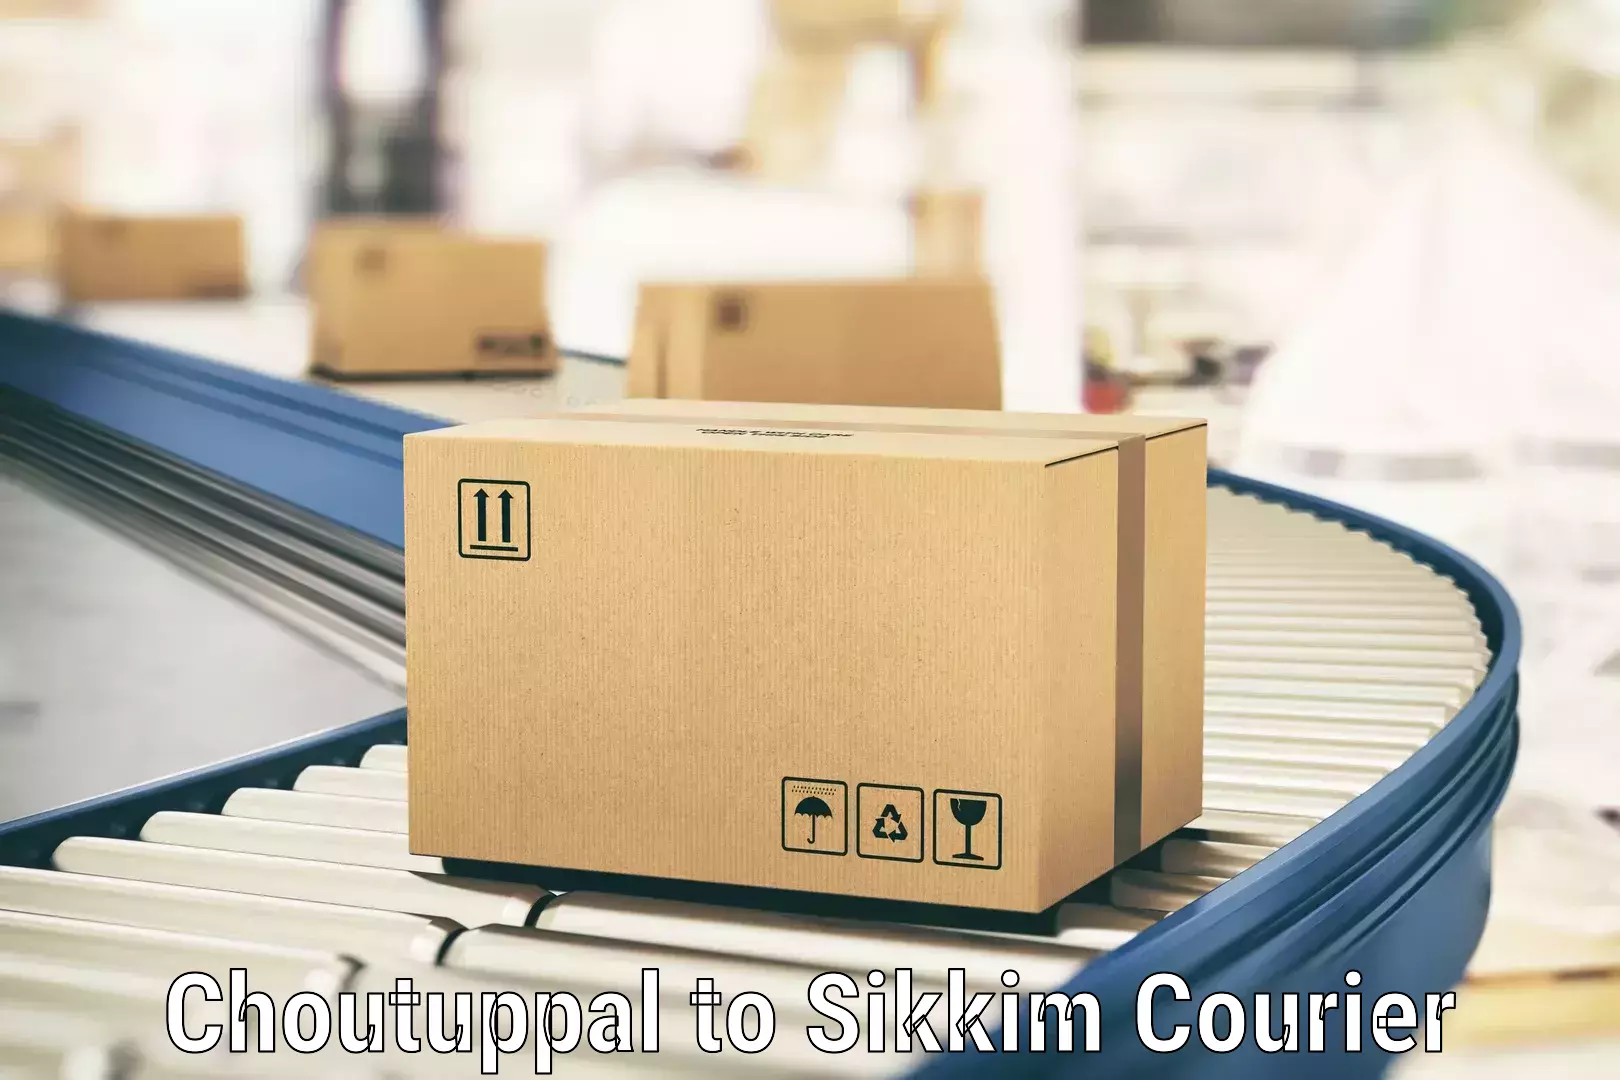 Round-the-clock parcel delivery Choutuppal to South Sikkim